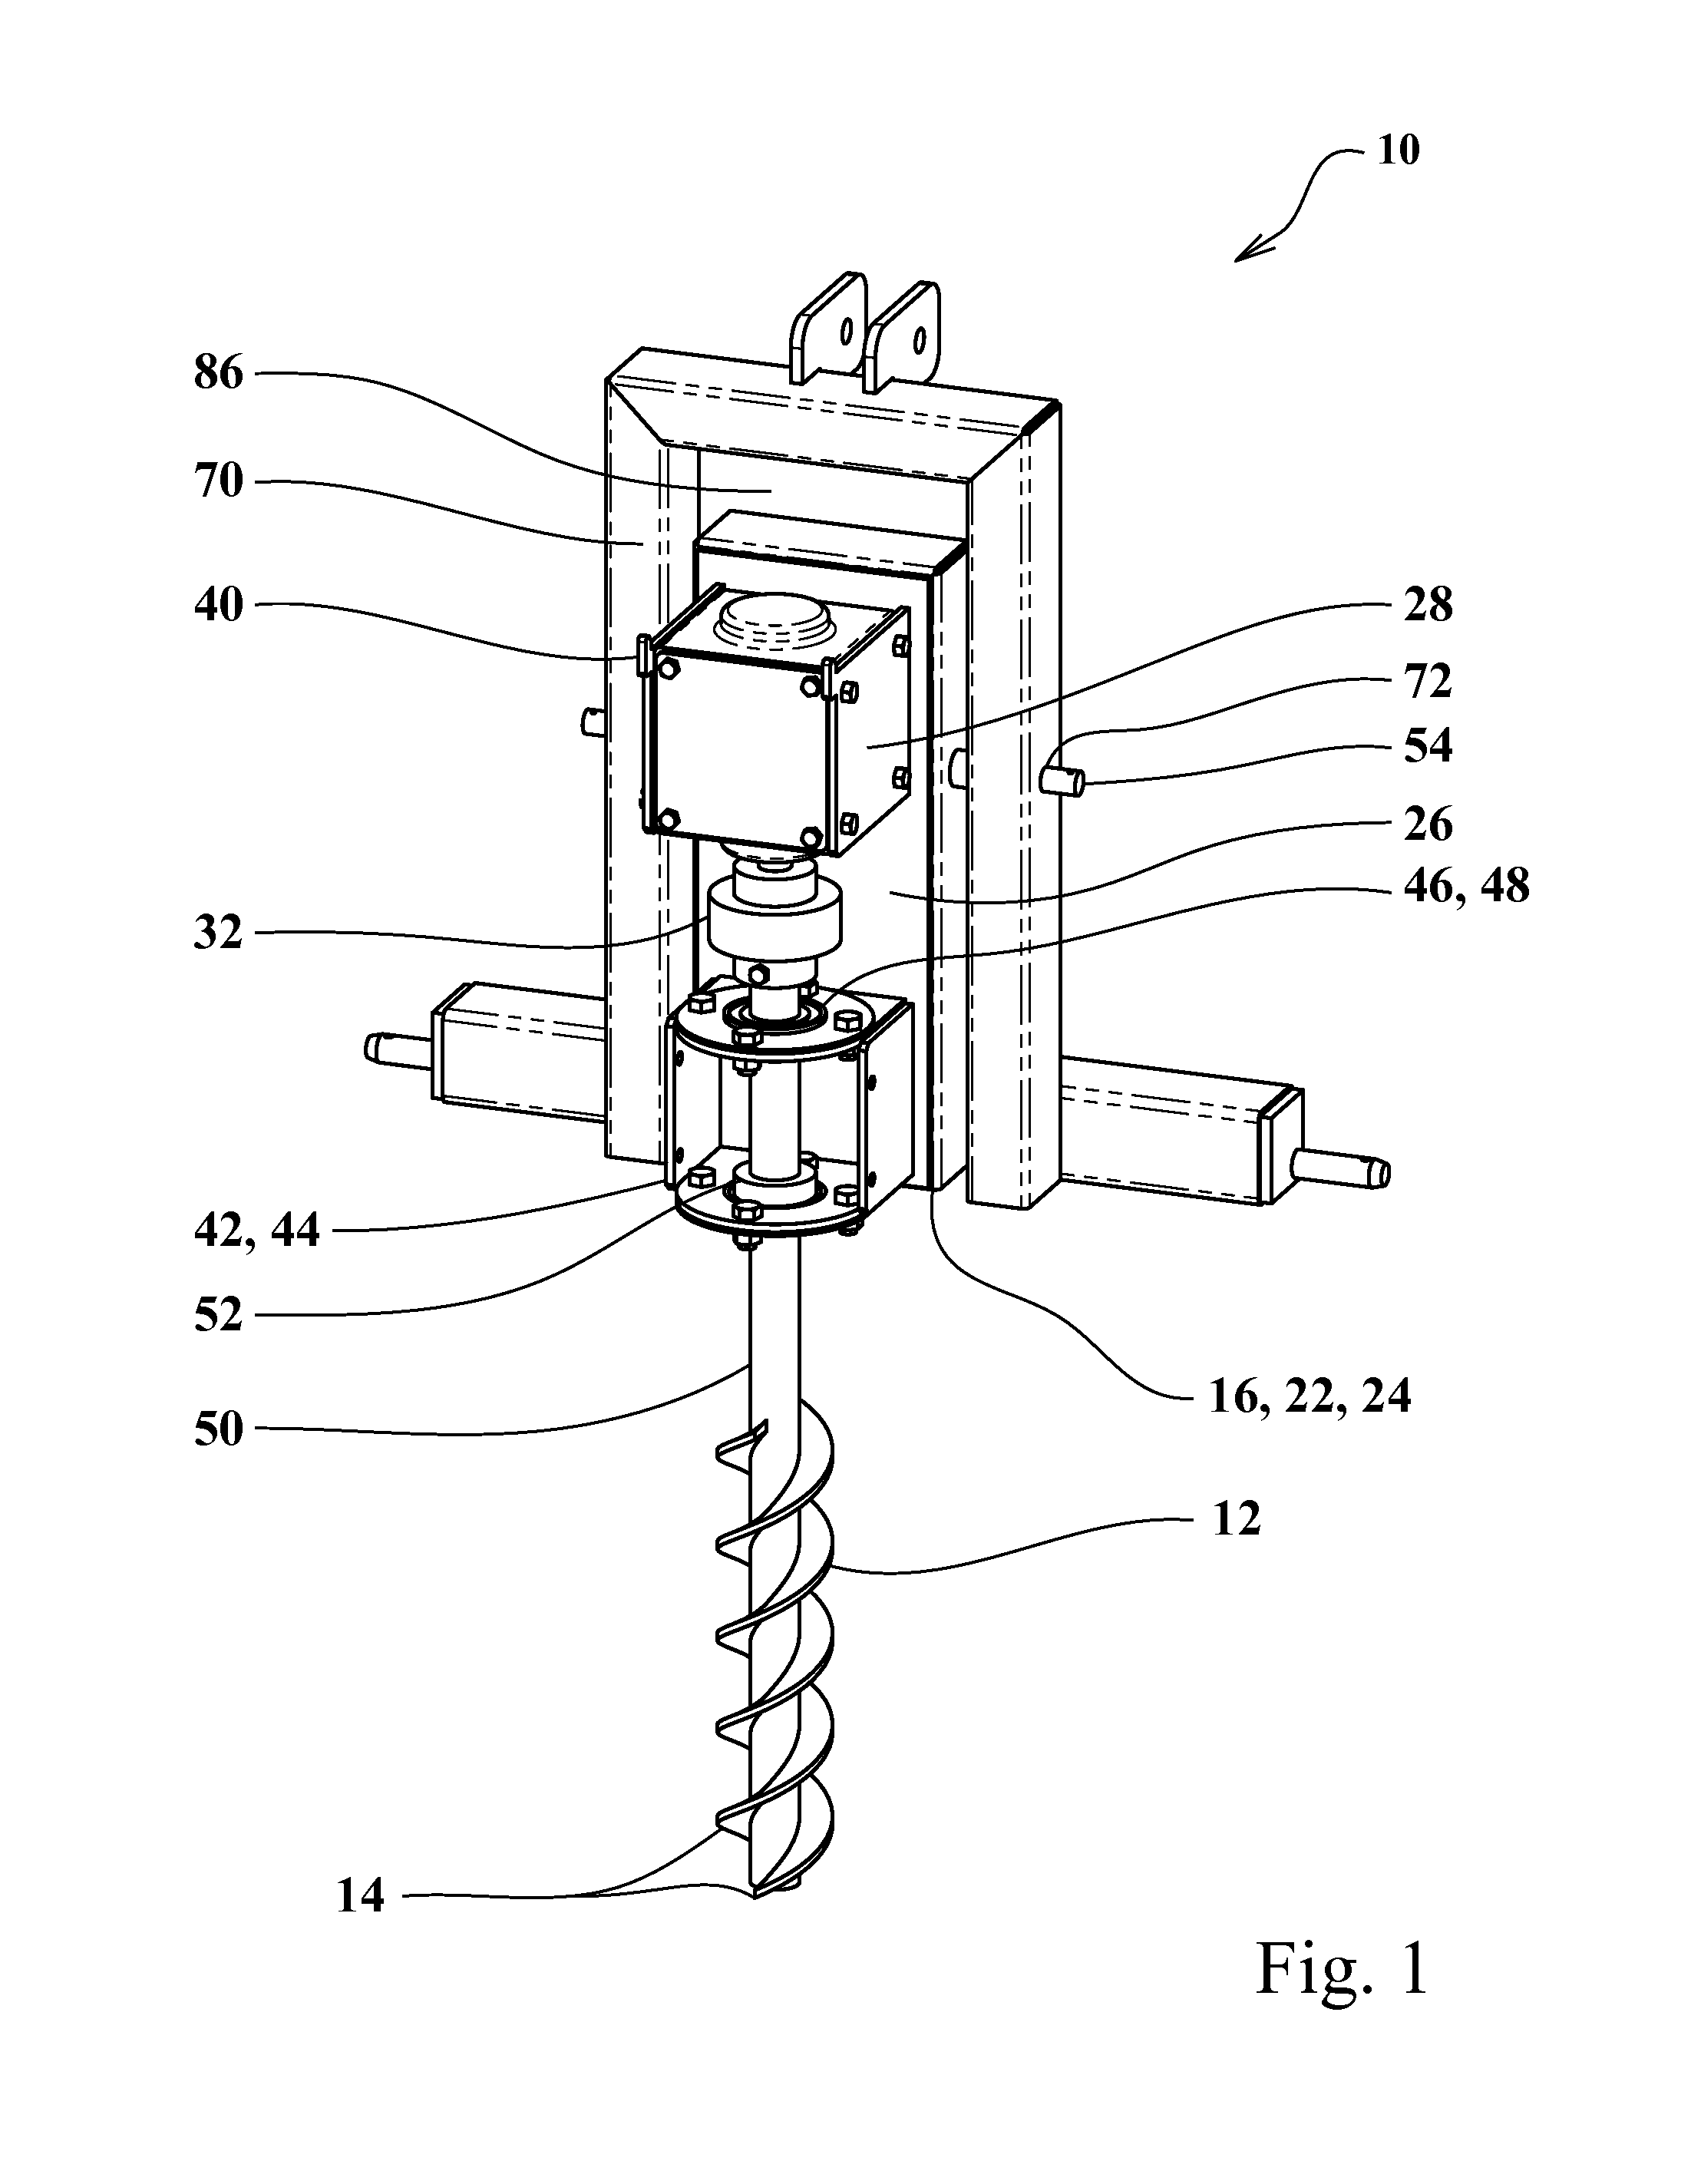 Horizontal auger garden tilling apparatus and method of use